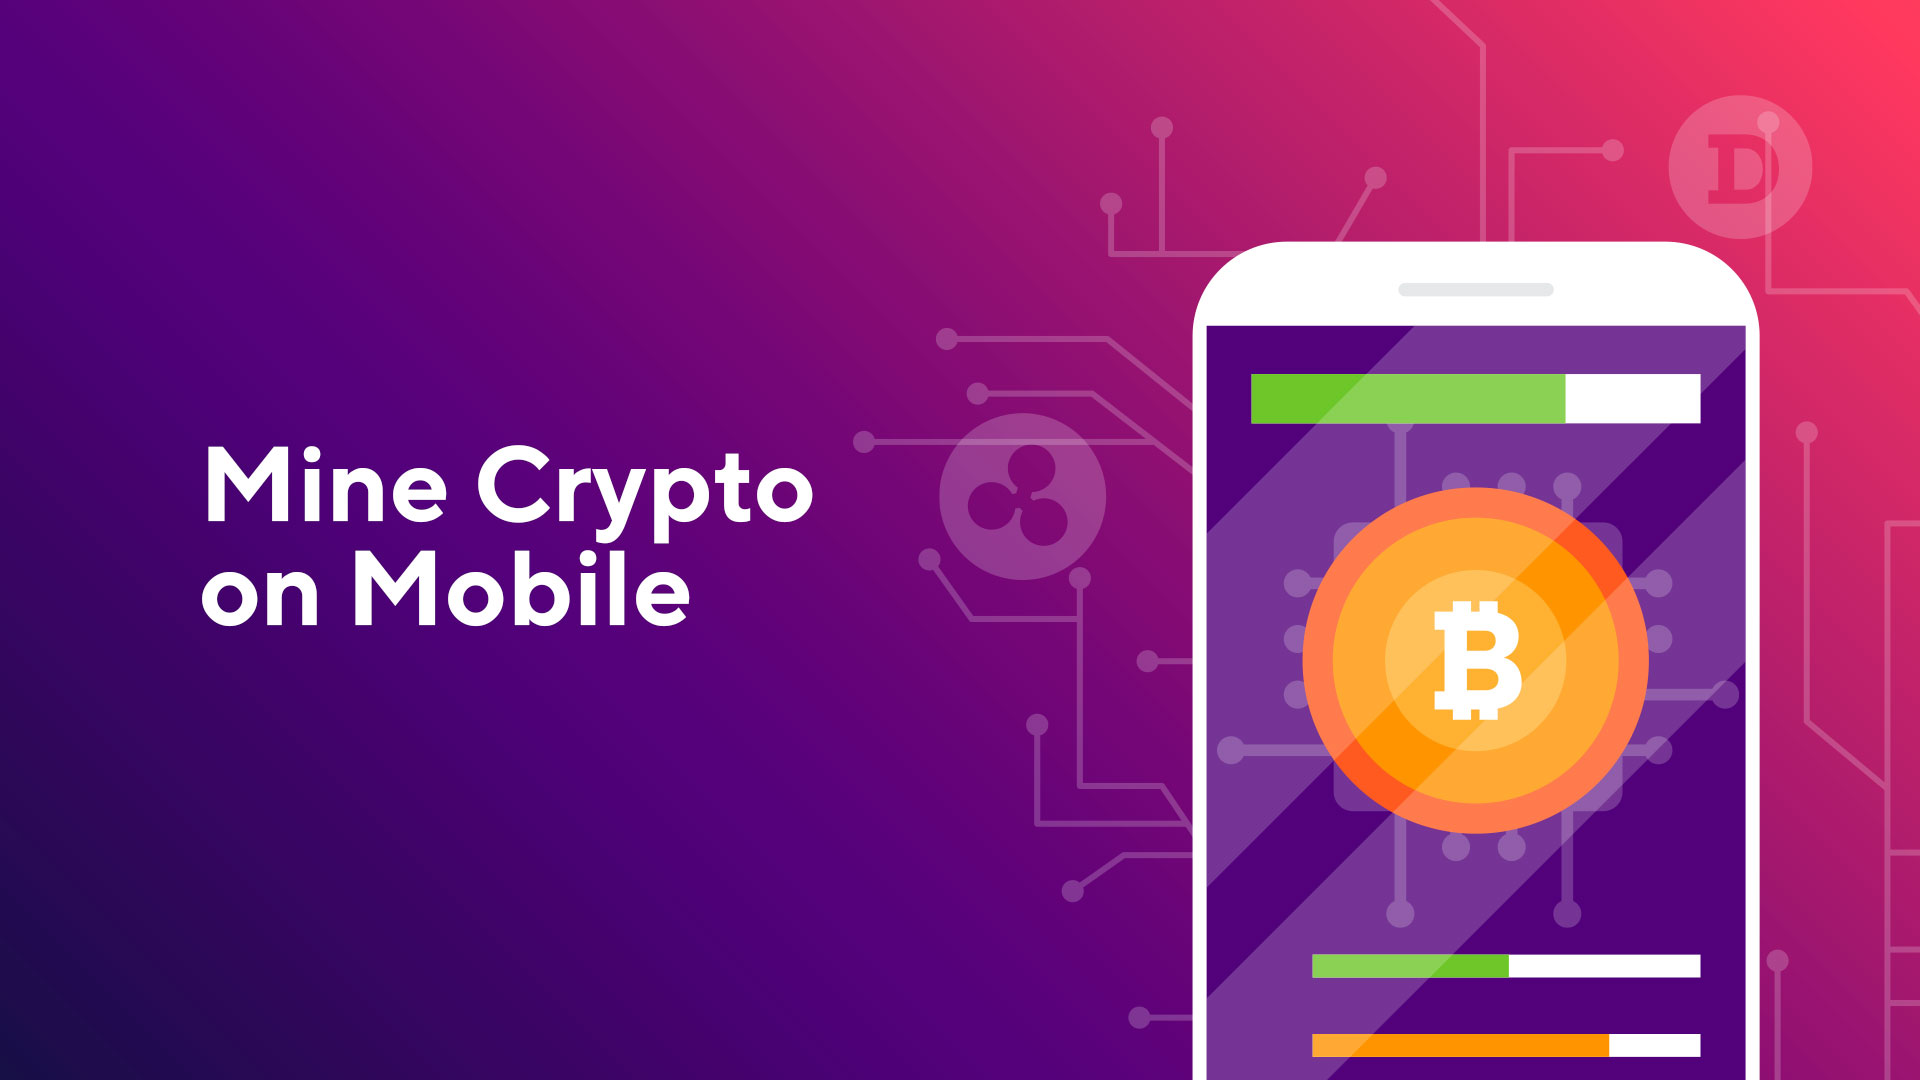 Cryptocurrency Mining: Prevent Websites From Mining Bitcoin on Android, iOS and Web | Gadgets 